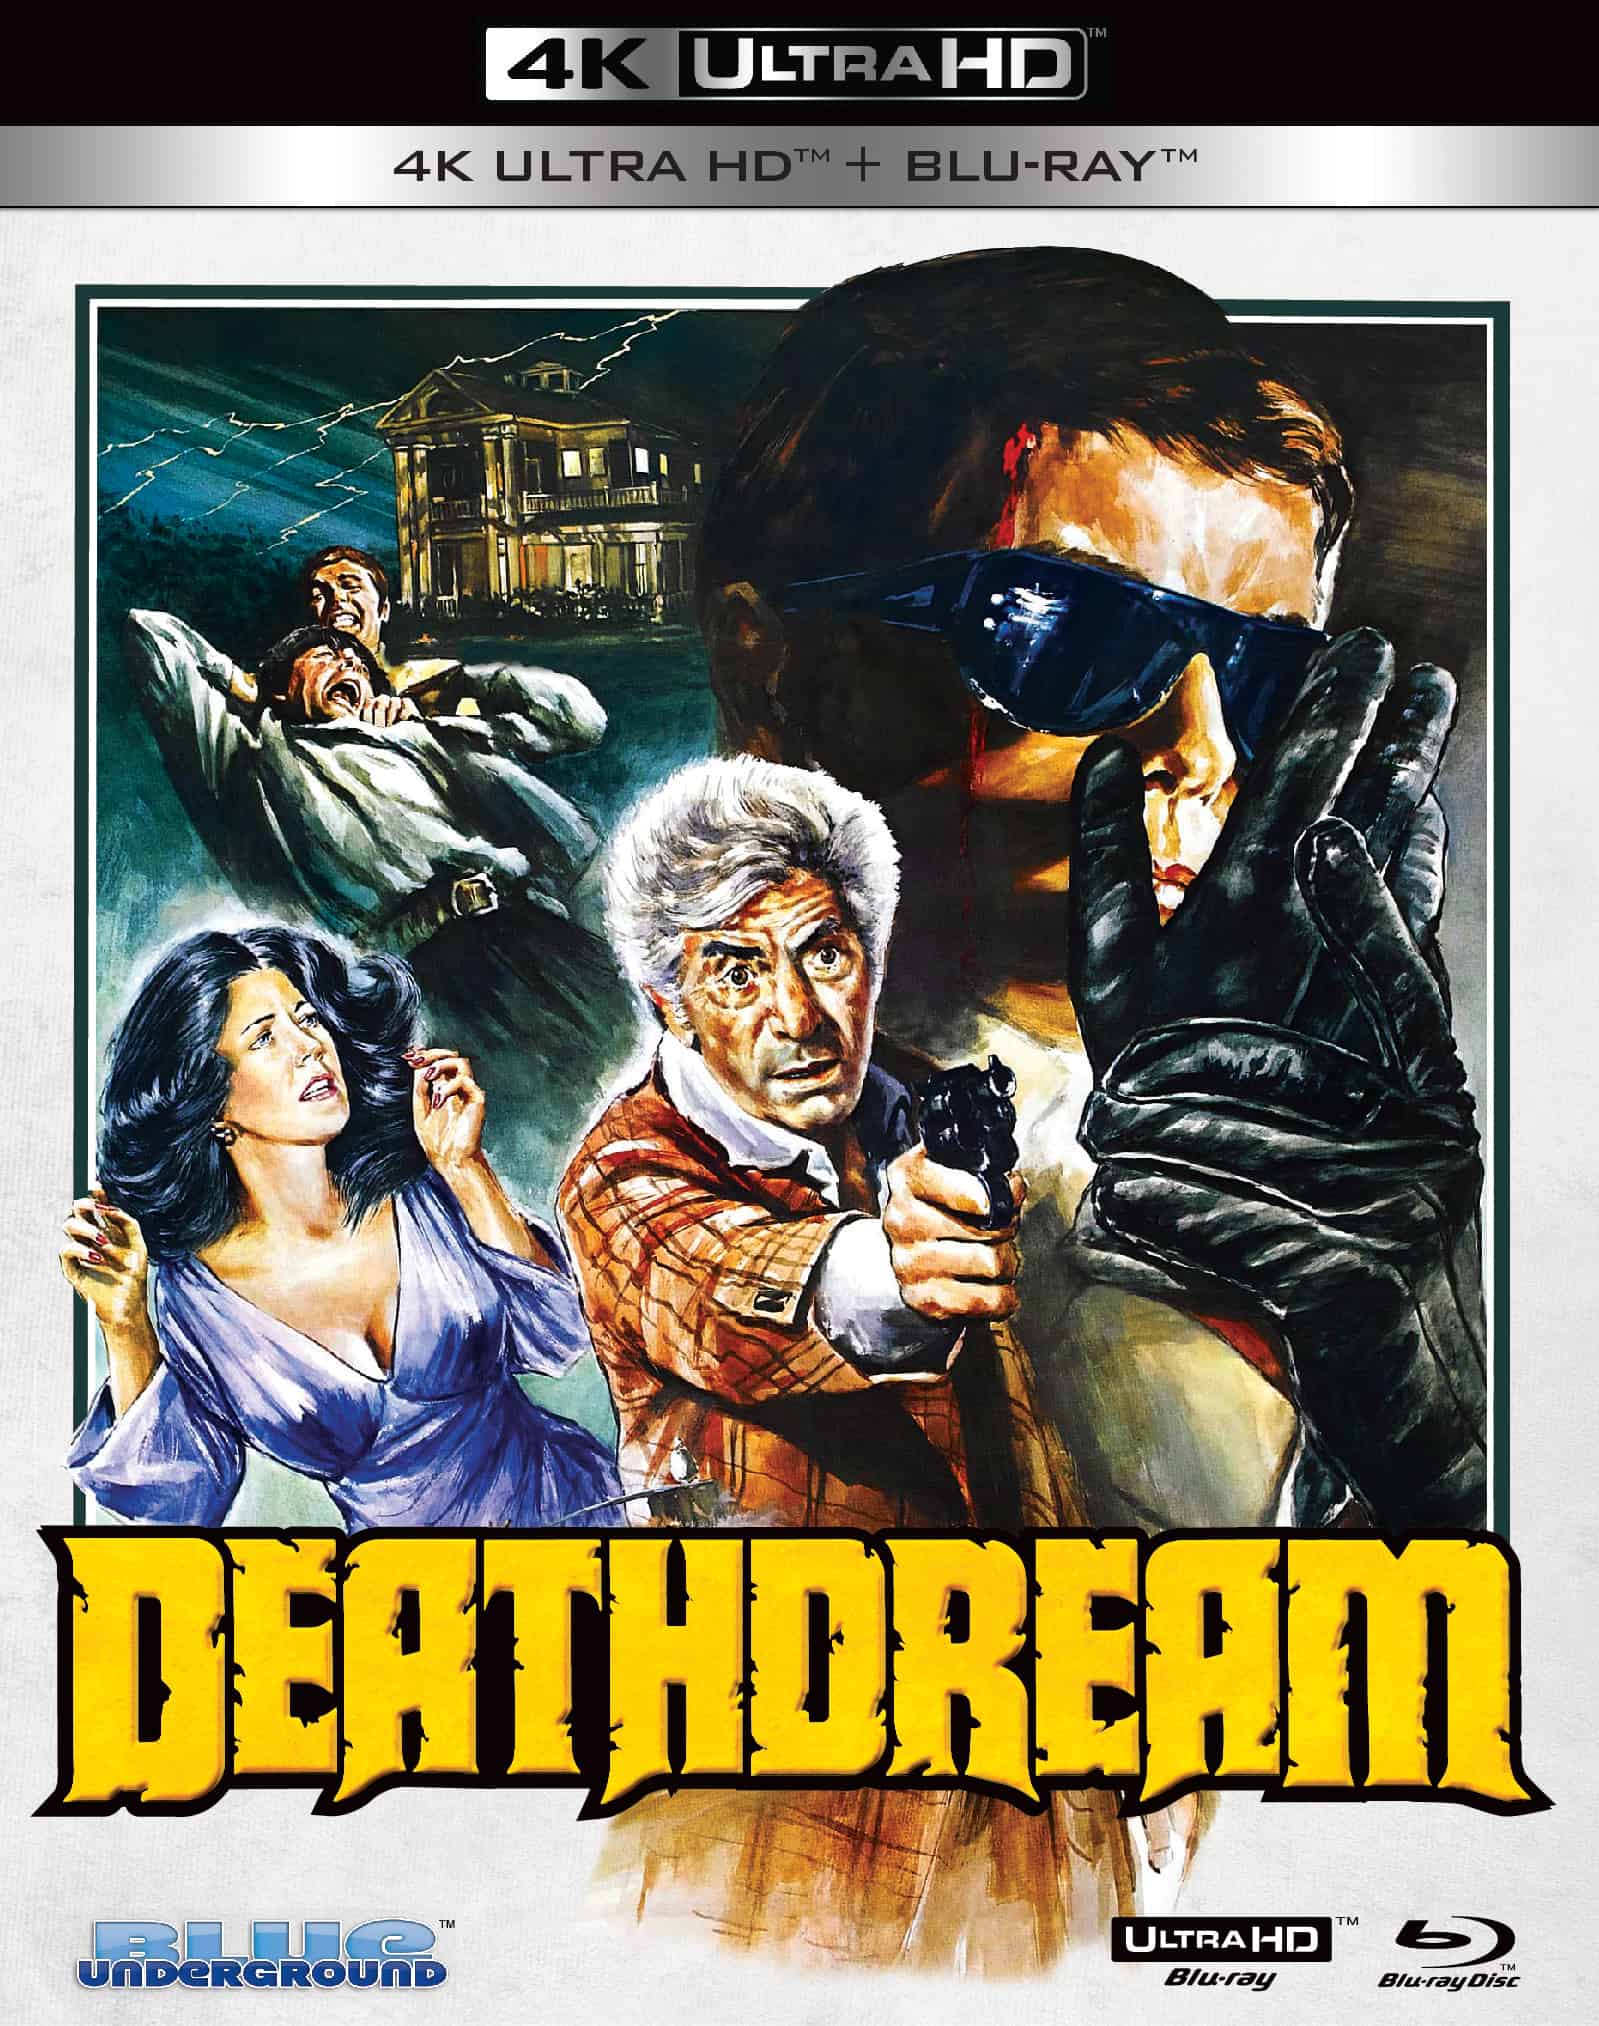 Deathdream comes to 4K UHD on May 21st 1